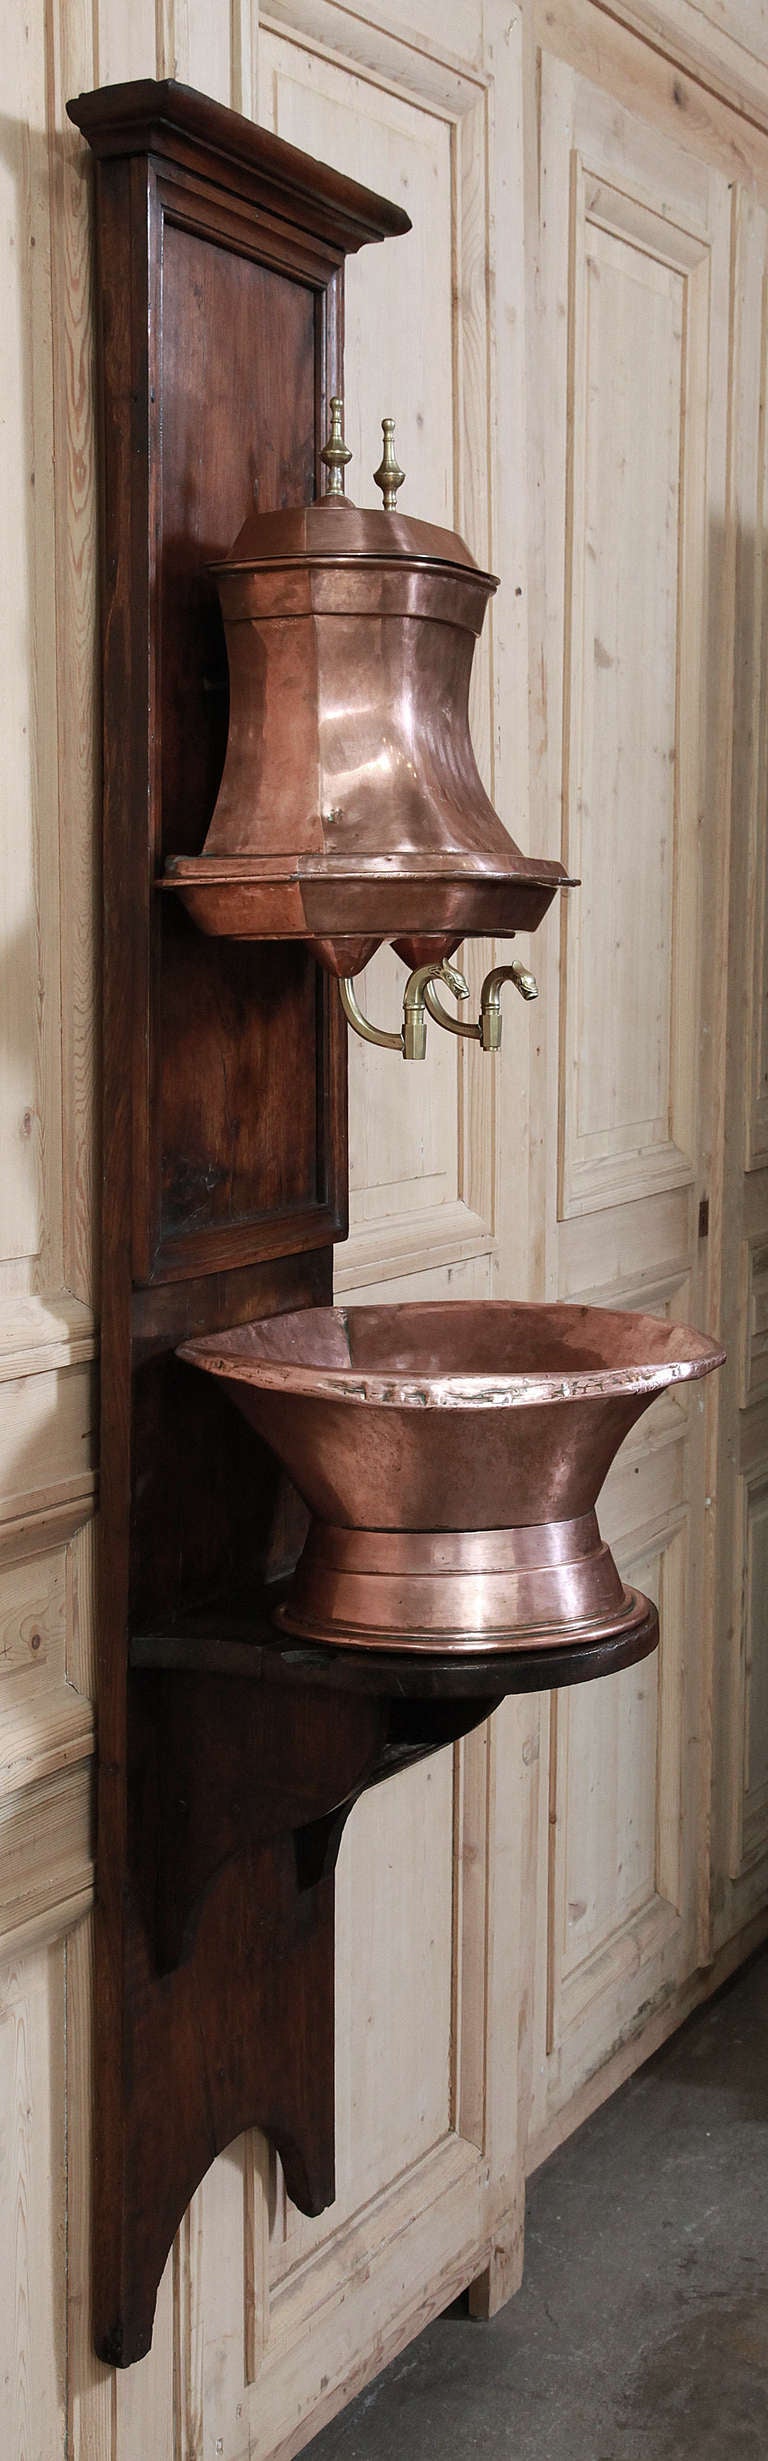 copper wall fountains